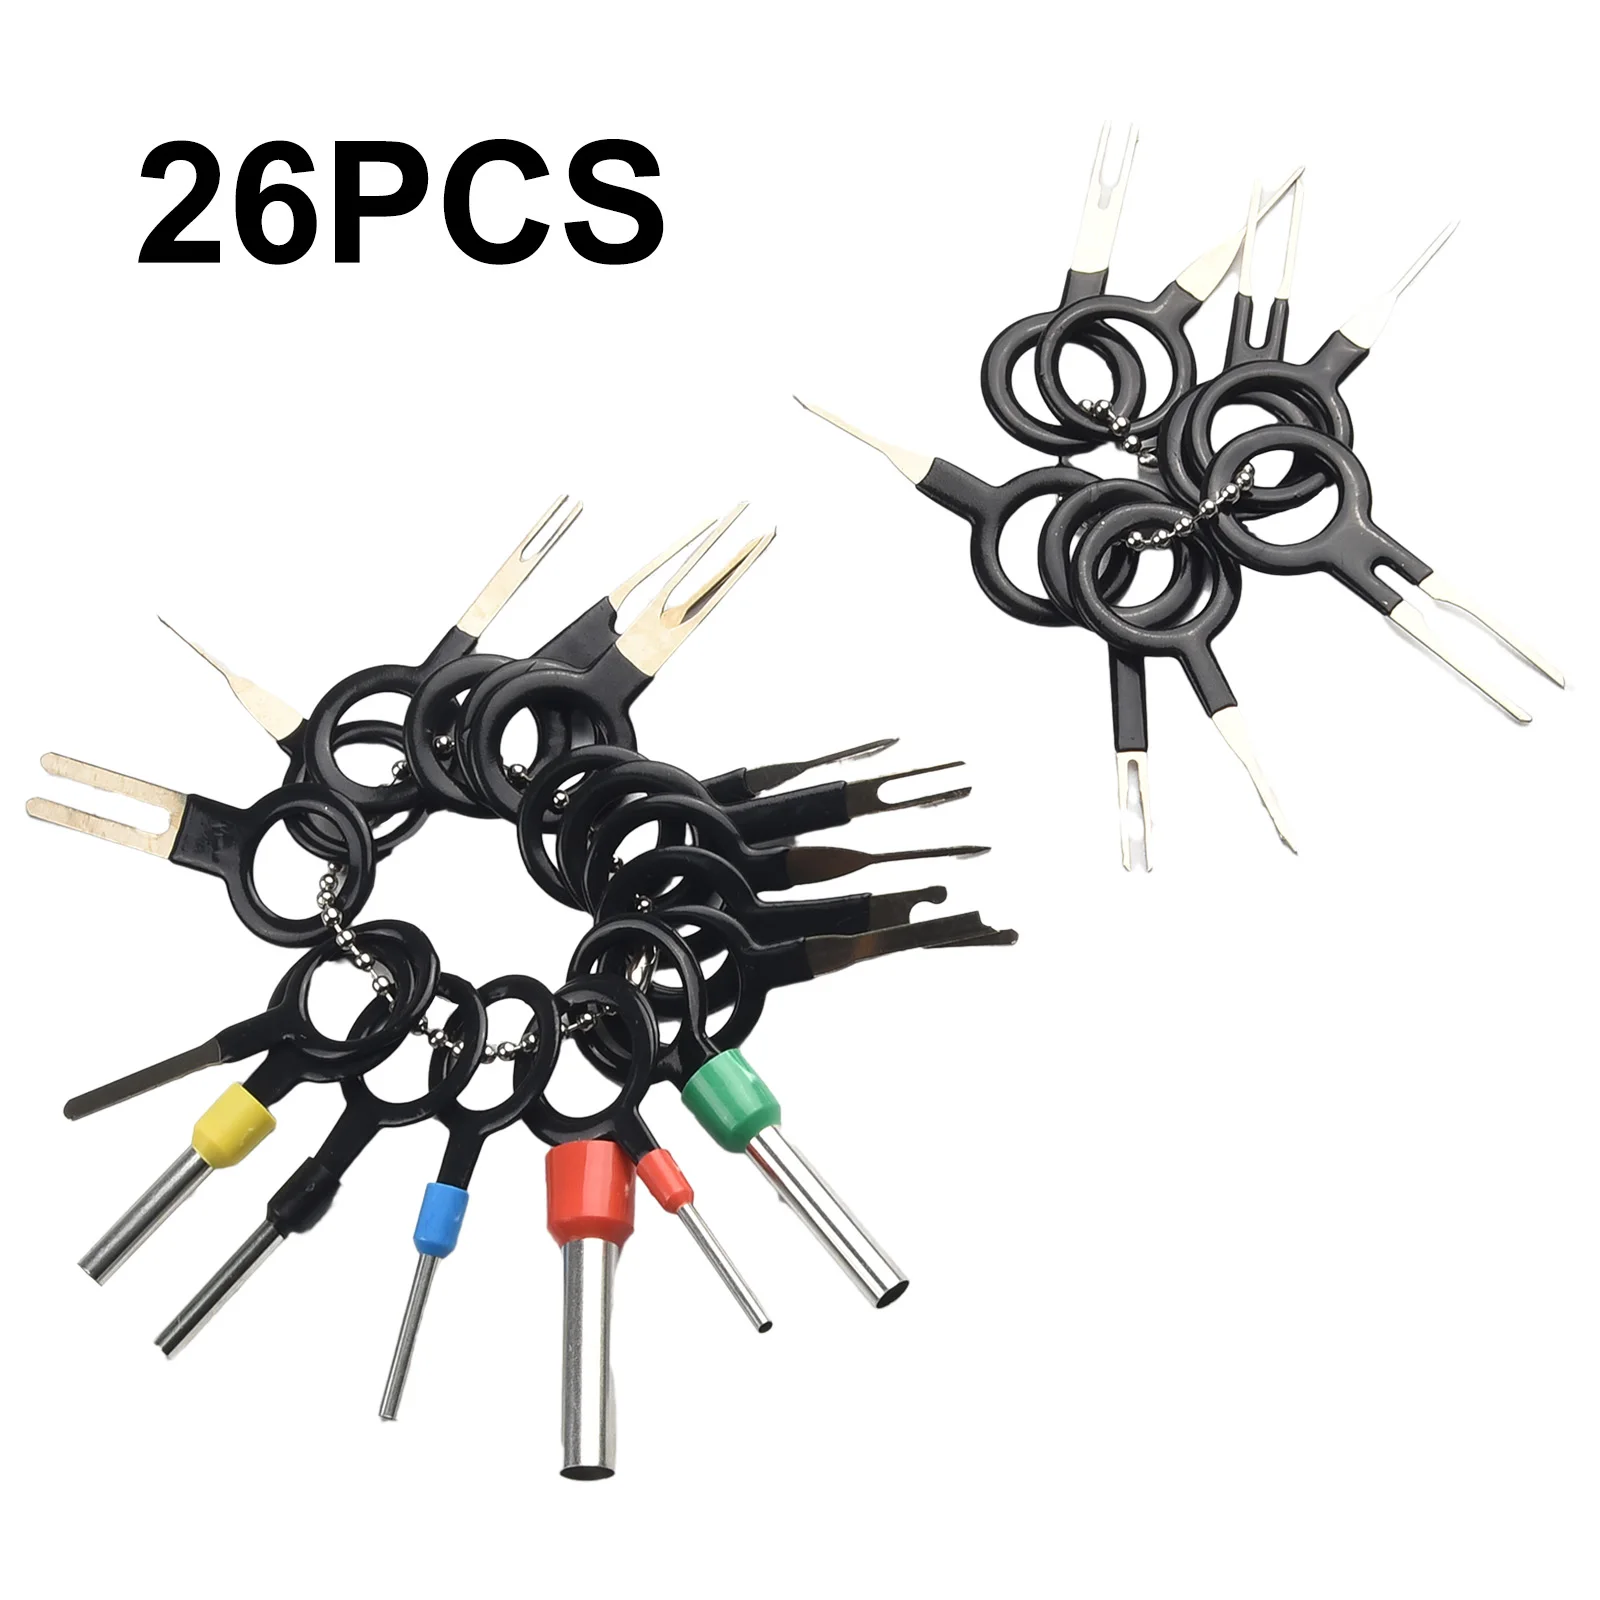 

26Pcs Car Wire Terminal Dismantling Tool Car Wiring Crimping Connector Pin Kit Terminal Pick Needle Wire Harness Repair Tools